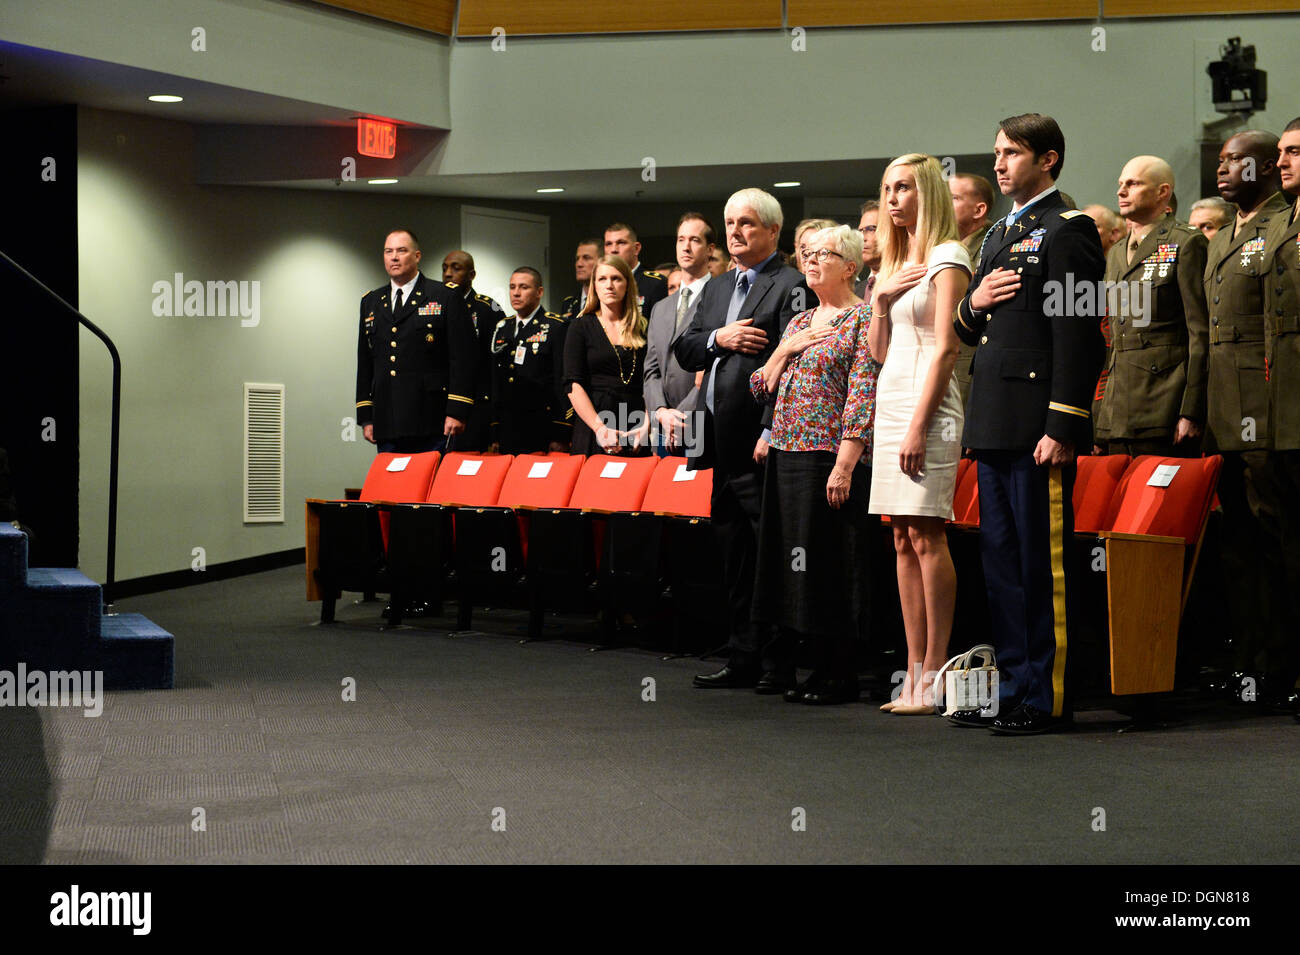 Former U.S. Army Capt. William D. Swenson, a Medal of Honor recipient, and his family stand for the national anthem during his Hall of Heroes induction ceremony at the Pentagon in Washington, Oct. 16, 2013. Stock Photo